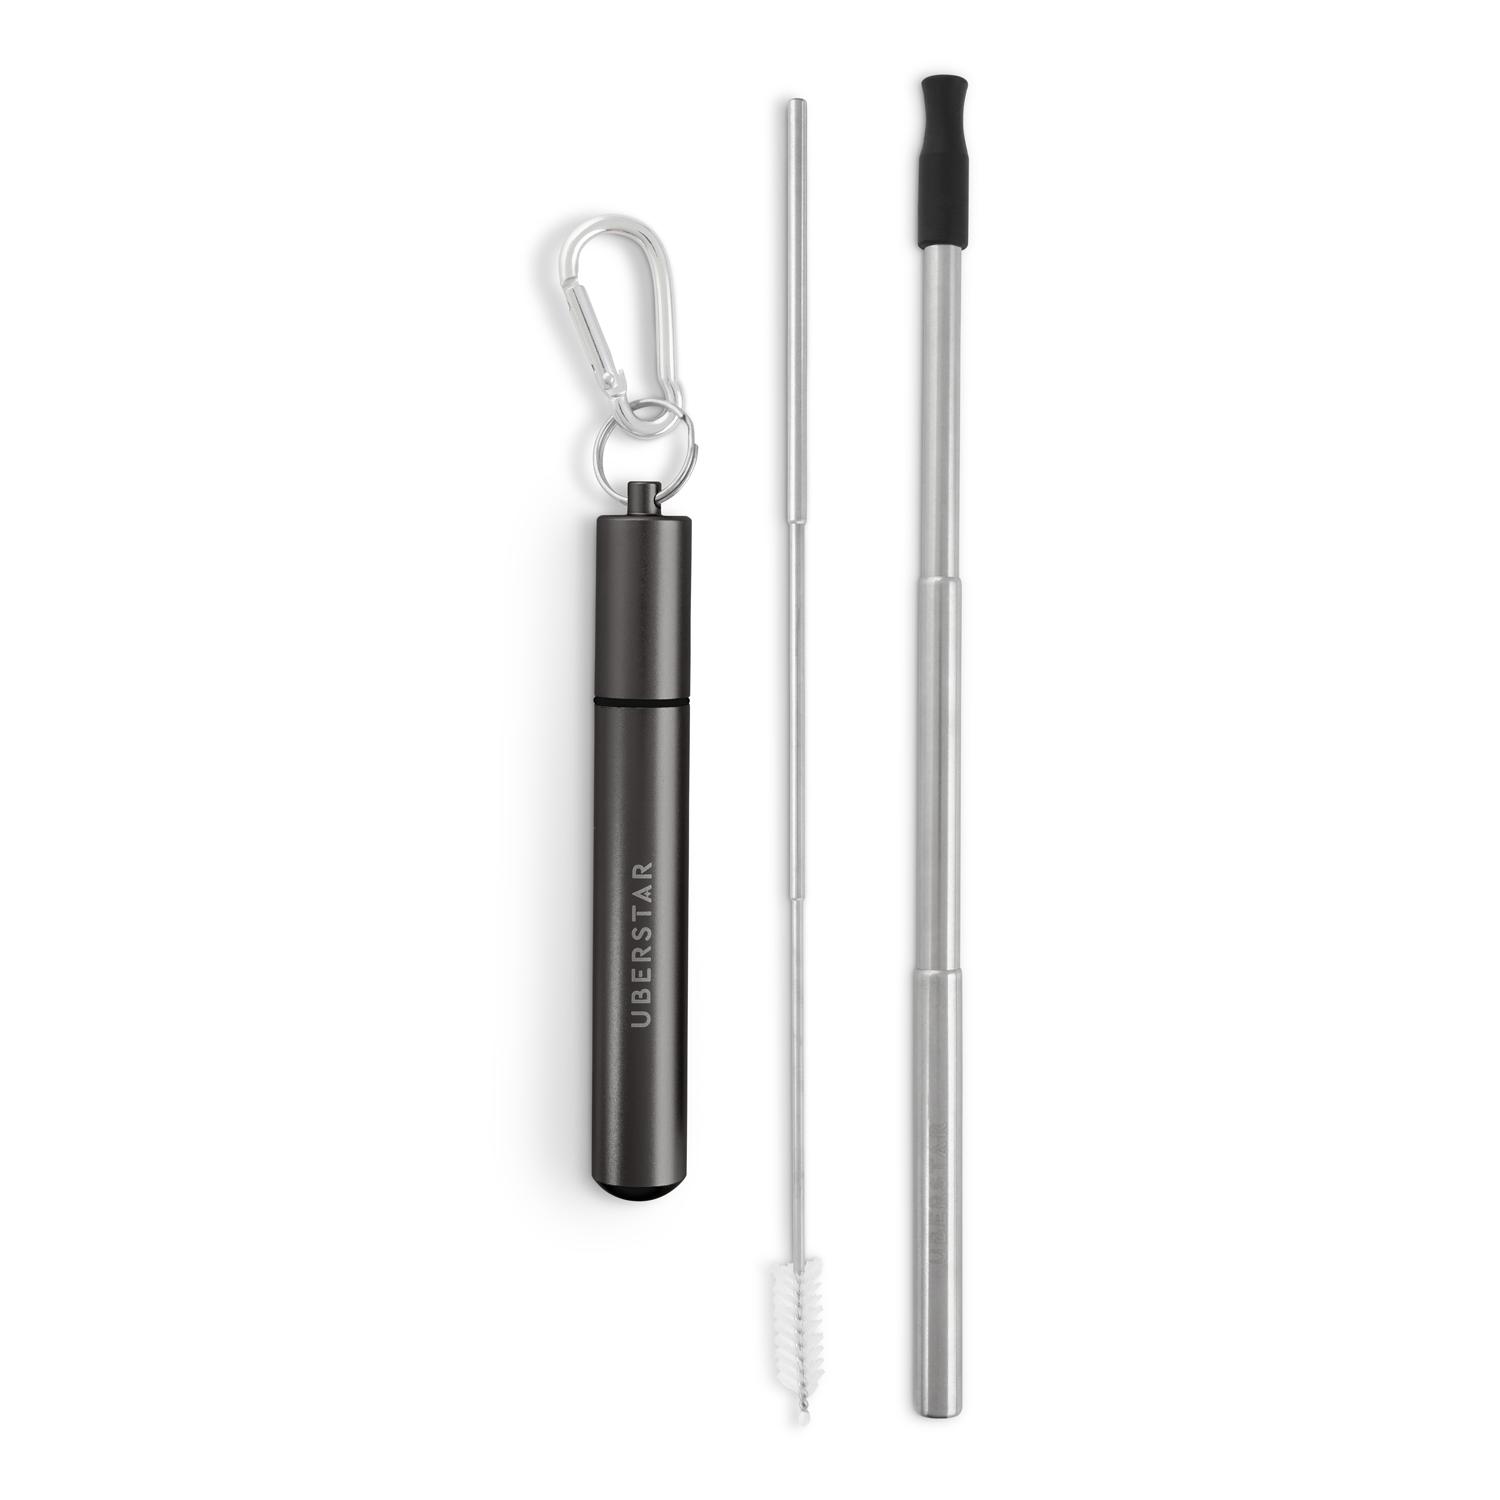 Uberstar Collapsible Travel Stainless Steel Straw - Grey